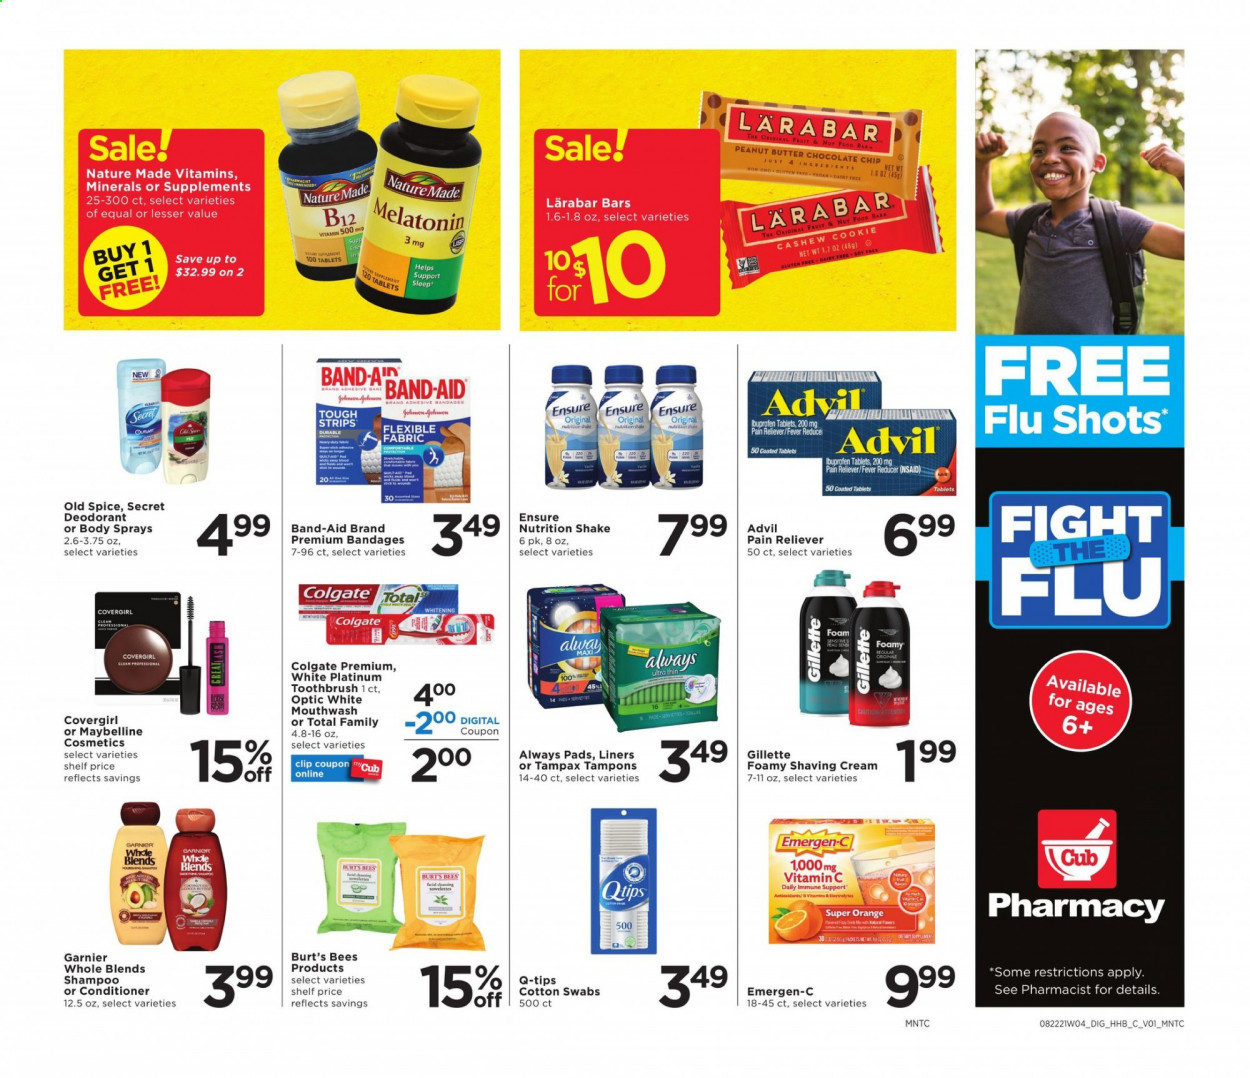 thumbnail - Cub Foods Flyer - 08/22/2021 - 08/28/2021 - Sales products - oranges, shake, strips, chocolate chips, spice, peanut butter, shampoo, Old Spice, Colgate, toothbrush, mouthwash, Tampax, Always pads, tampons, Garnier, conditioner, anti-perspirant, deodorant, Gillette, Nature Made, vitamin c, Ibuprofen, Advil Rapid, Emergen-C. Page 9.